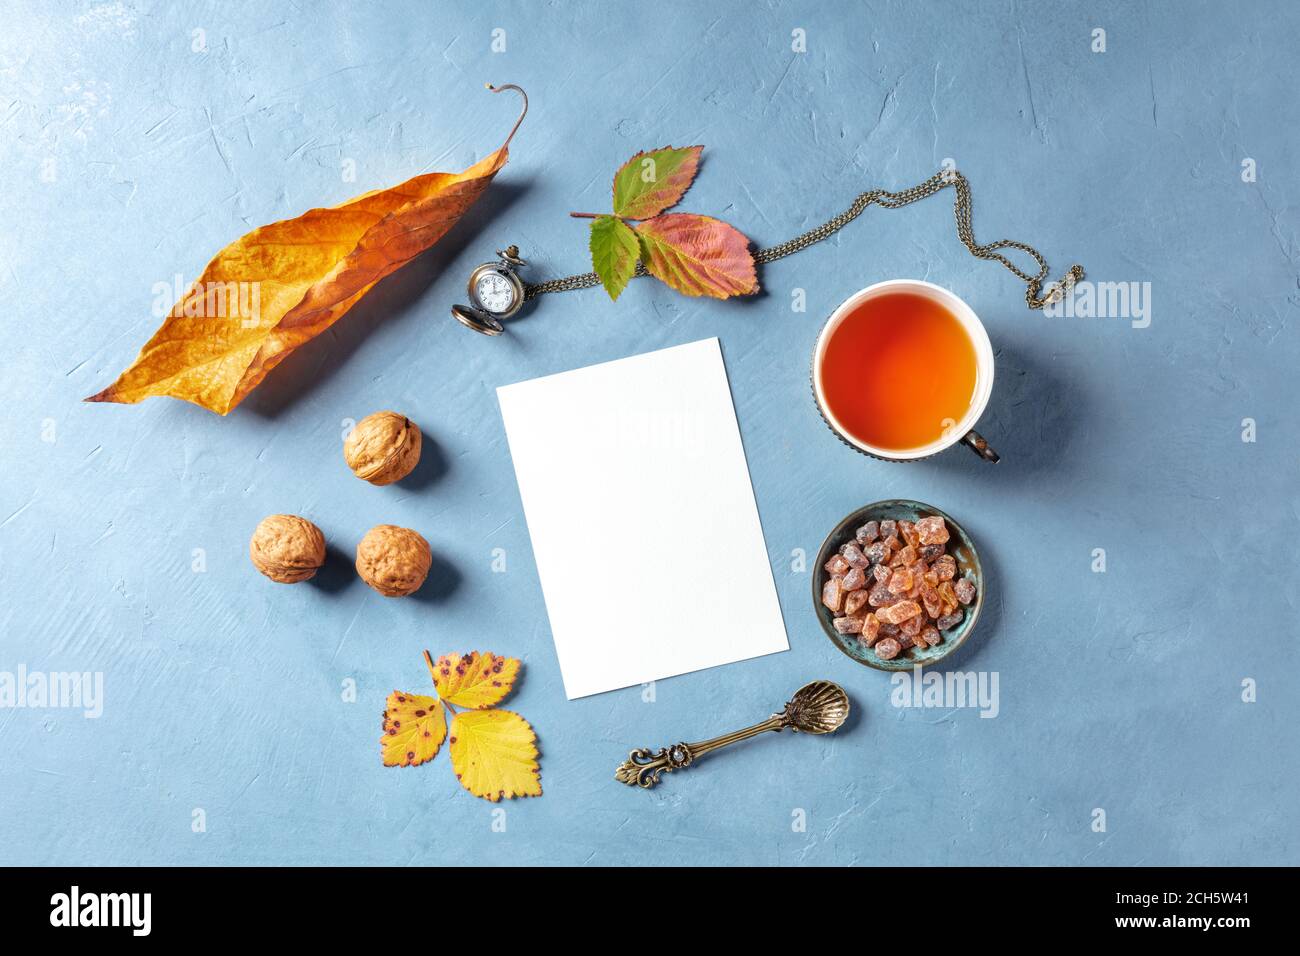 Autumn stationery mockup of an A5 invitation or greeting card, shot from the top with tea and fall leaves, with a vintage watch and nuts Stock Photo